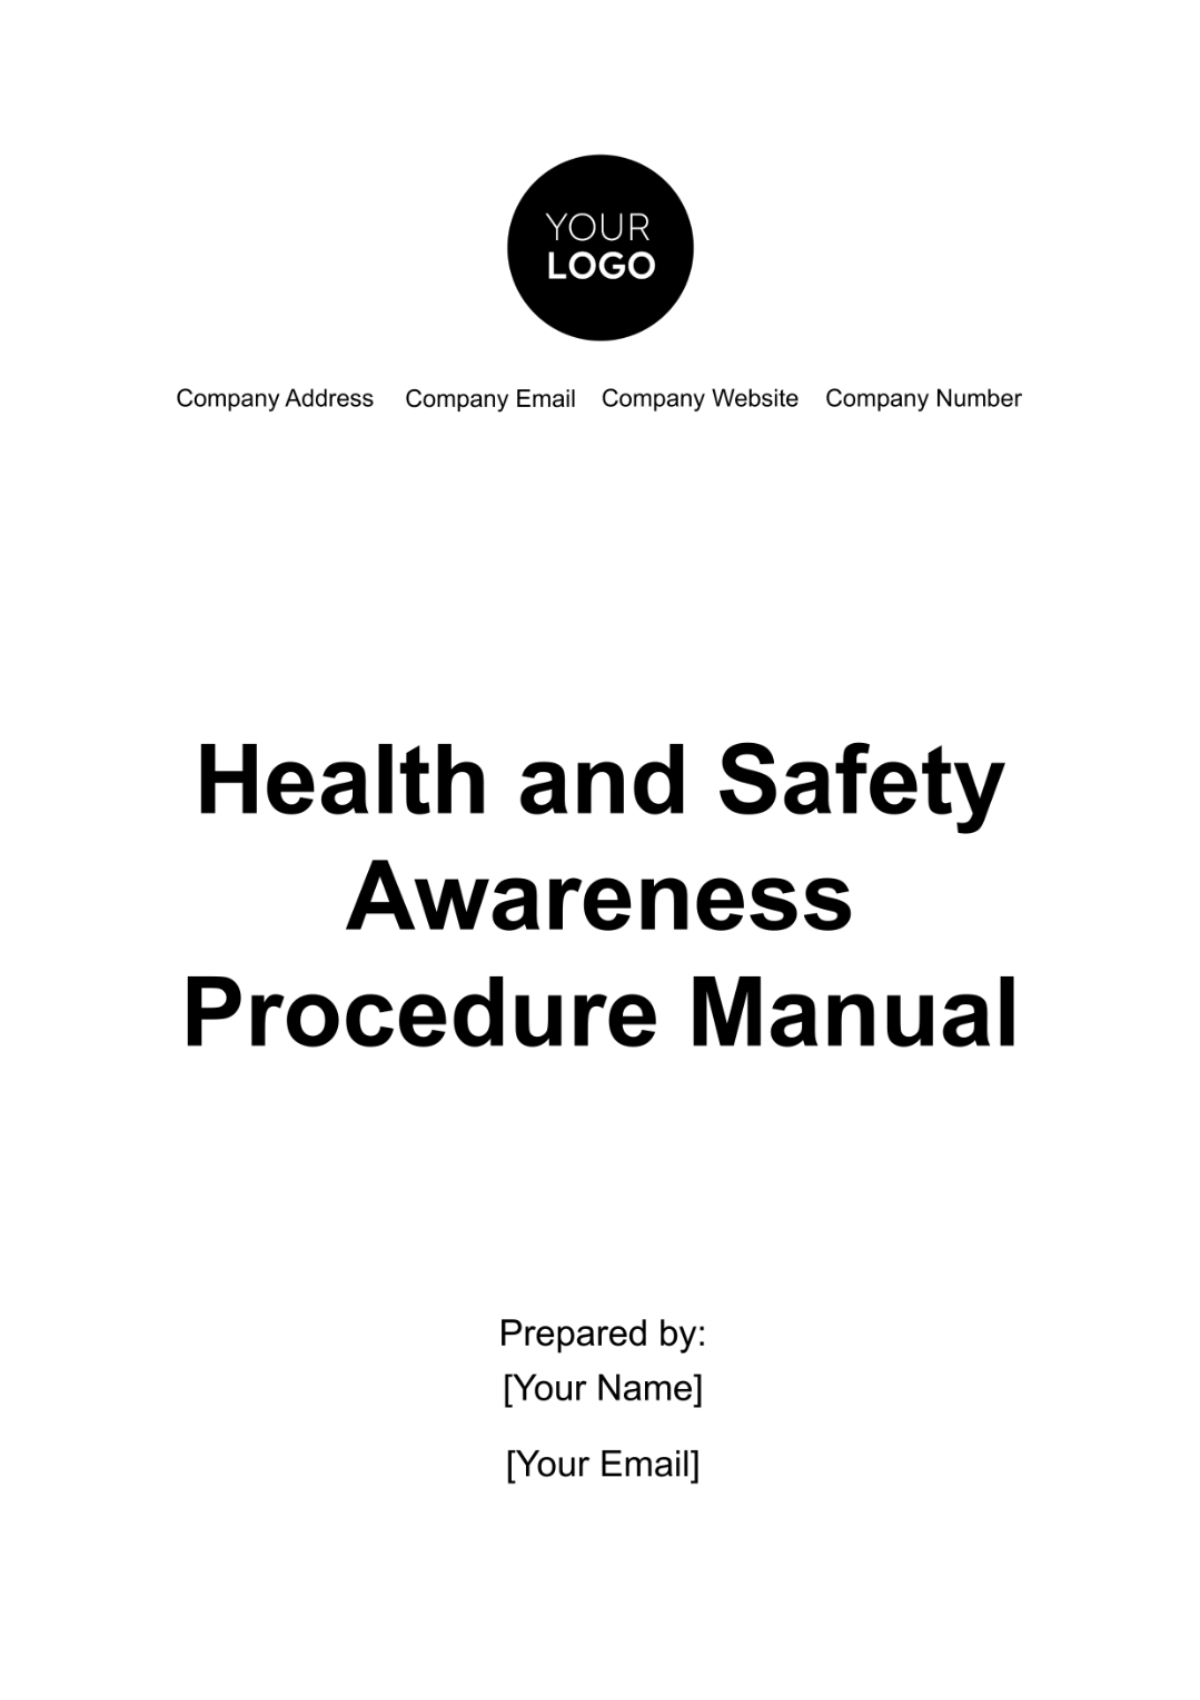 Free Health & Safety Awareness Procedure Manual Template